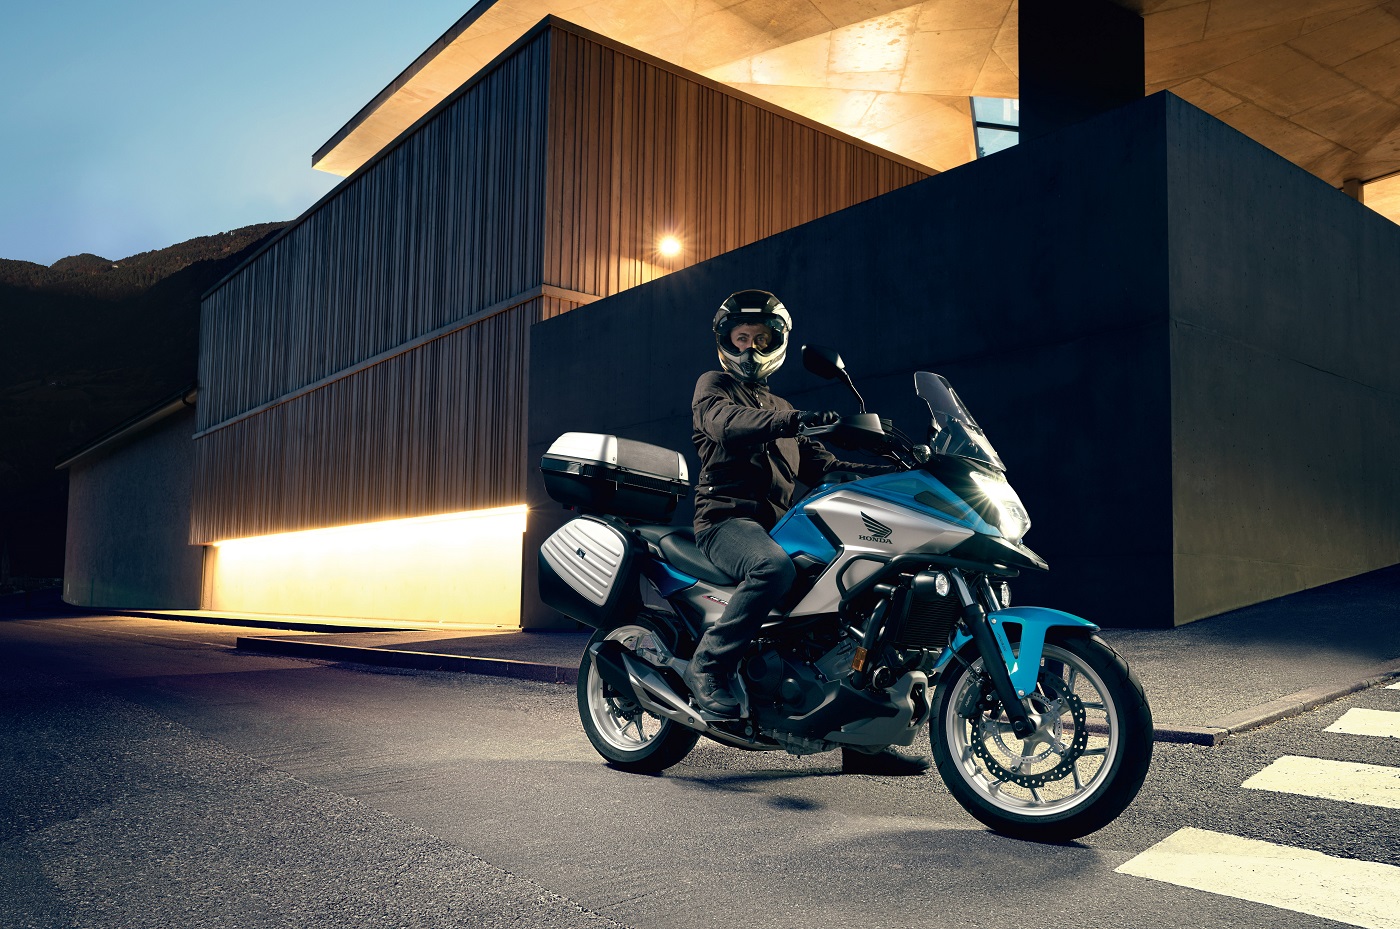 Free accessories for the Honda NC750X worth up to €1250 available at M50 Honda